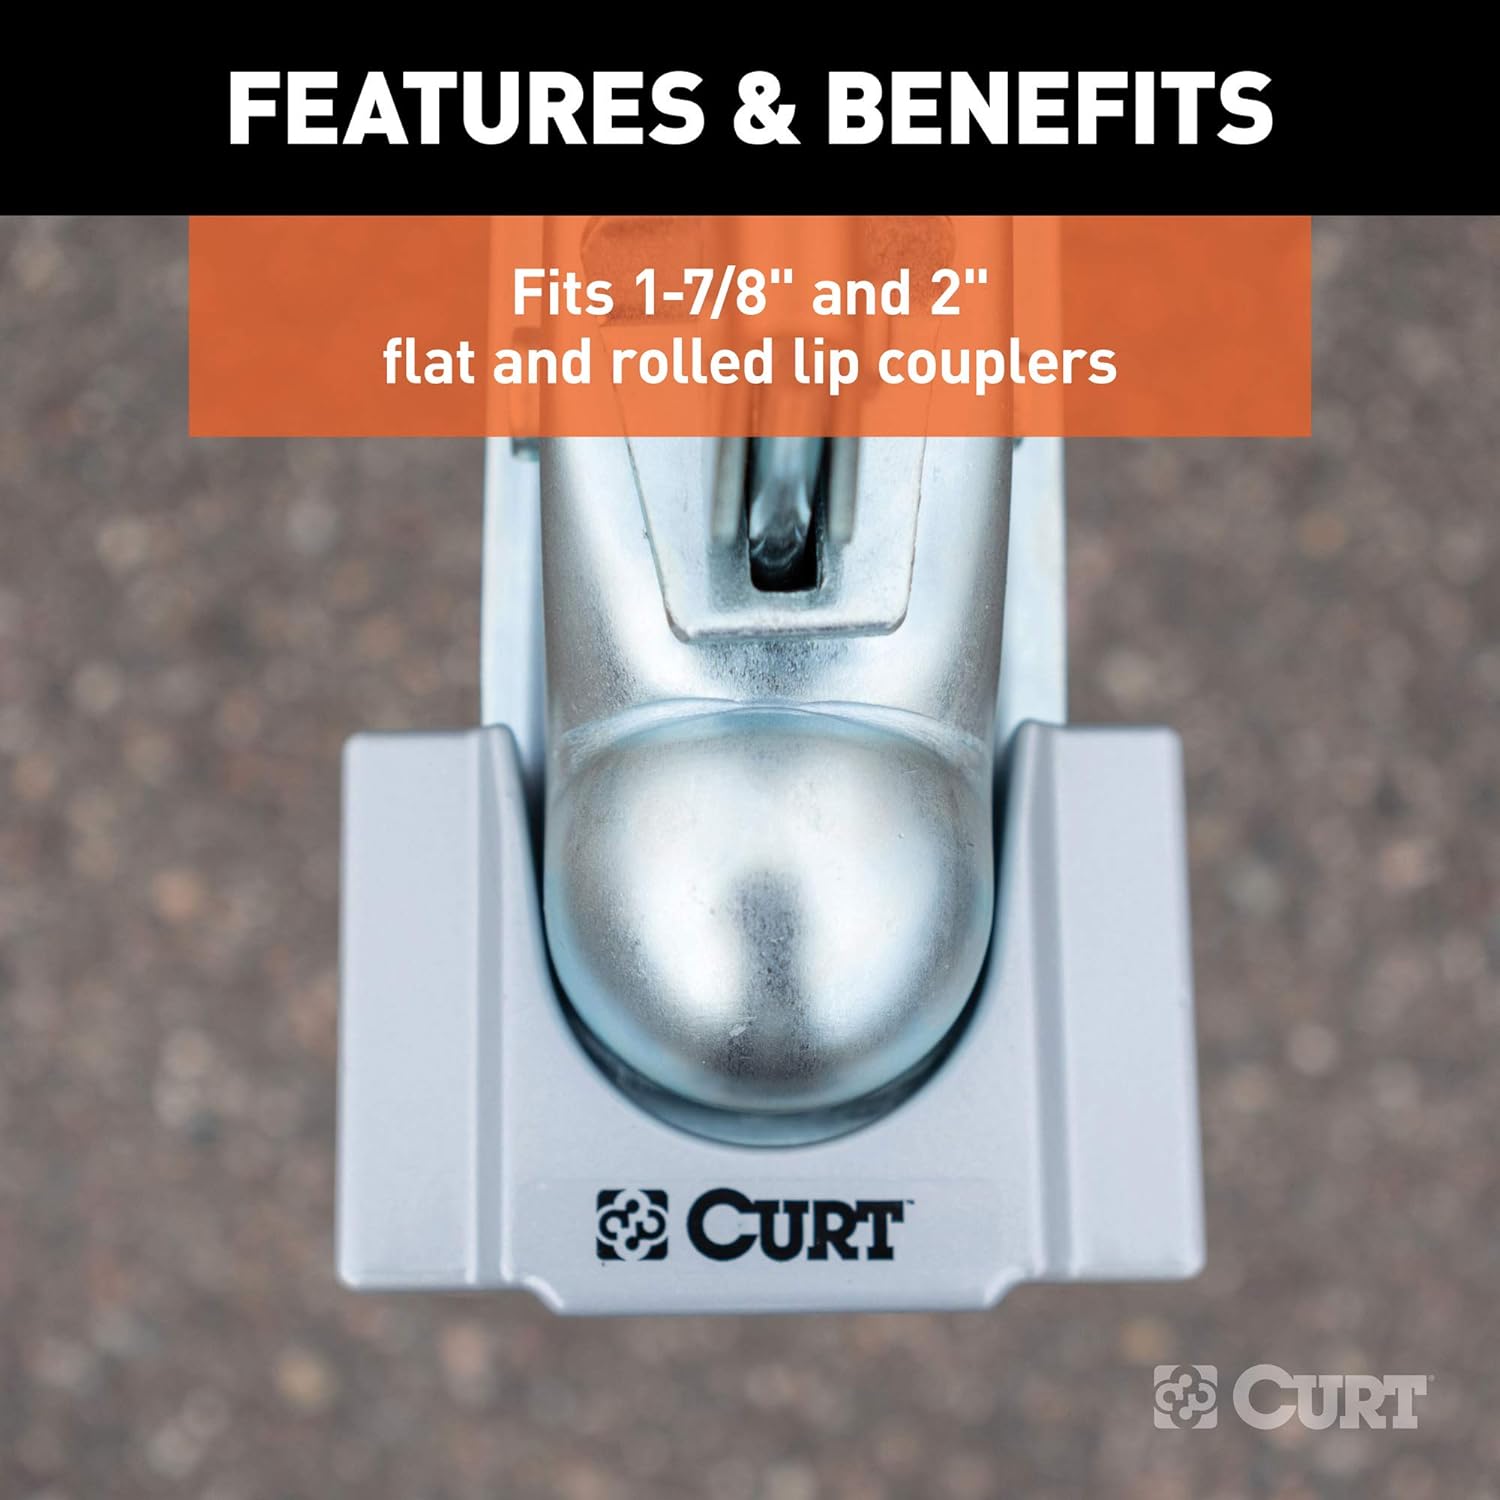 CURT 23079 Powder-Coated Aluminum Trailer Tongue Lock, Fits Most 2-Inch, 1-7/8-Inch Couplers , grey